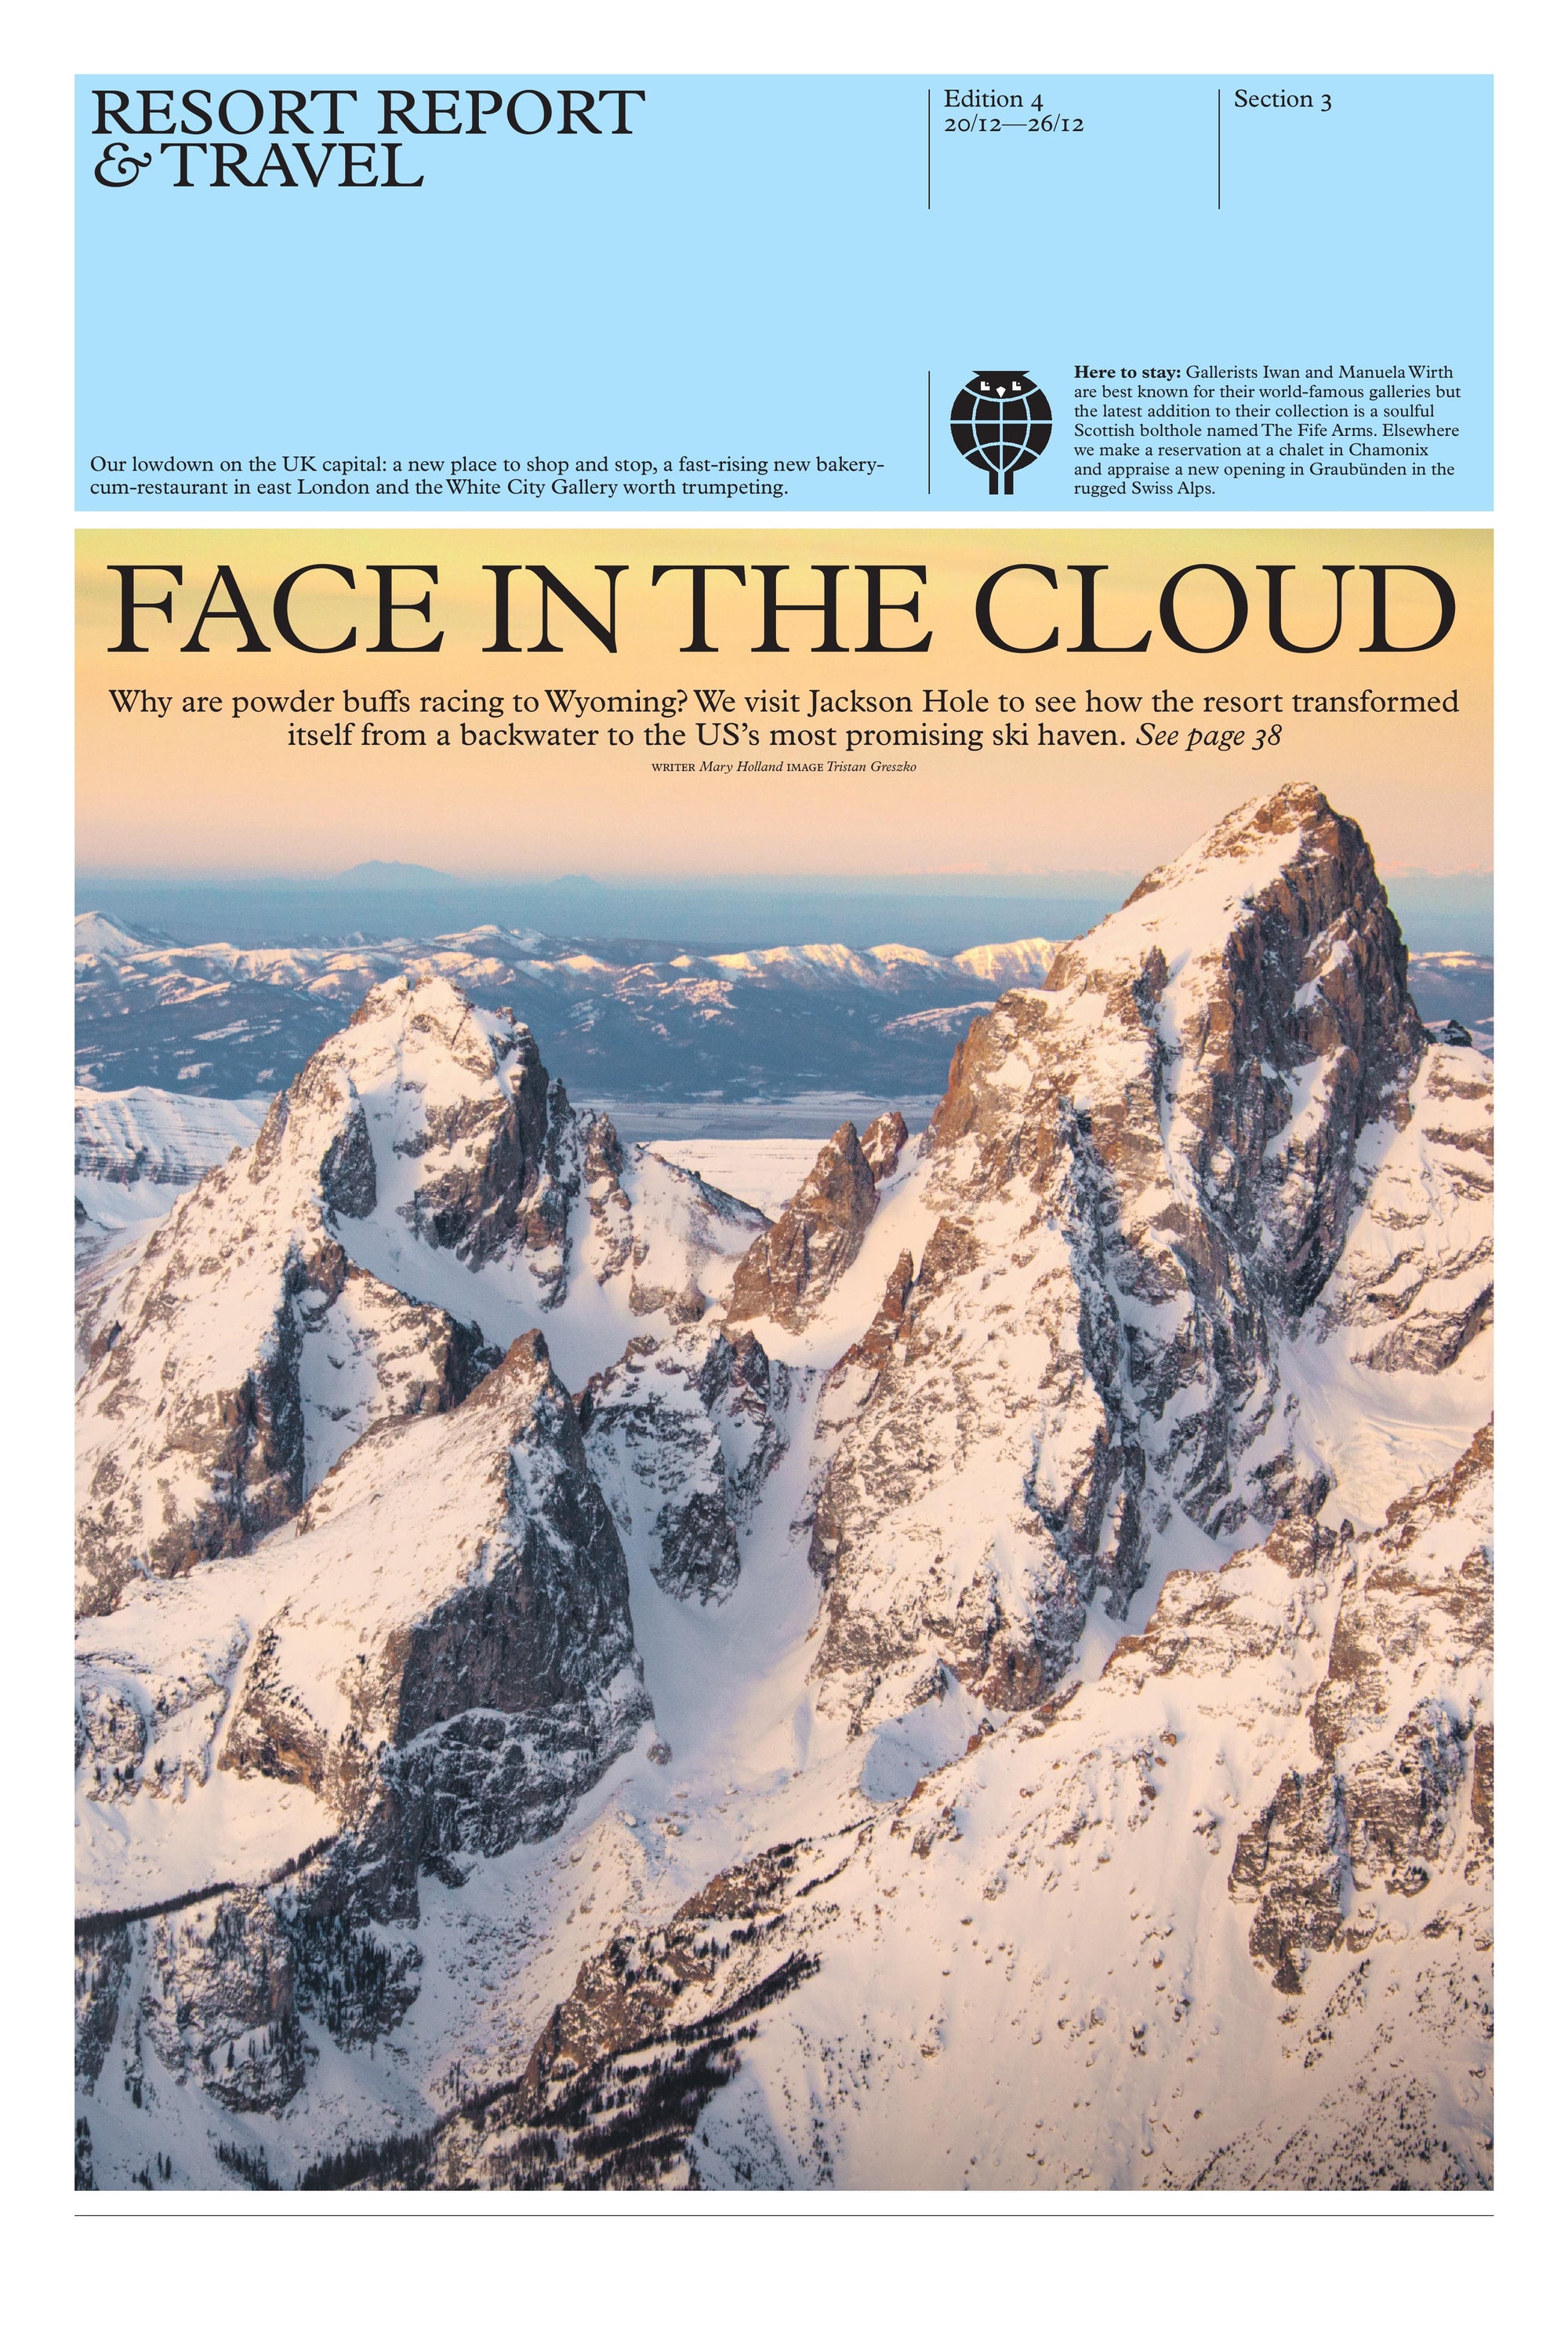 Monocle Magazine features Christian Burch & Mountain Dandy in Resort Report & Travel